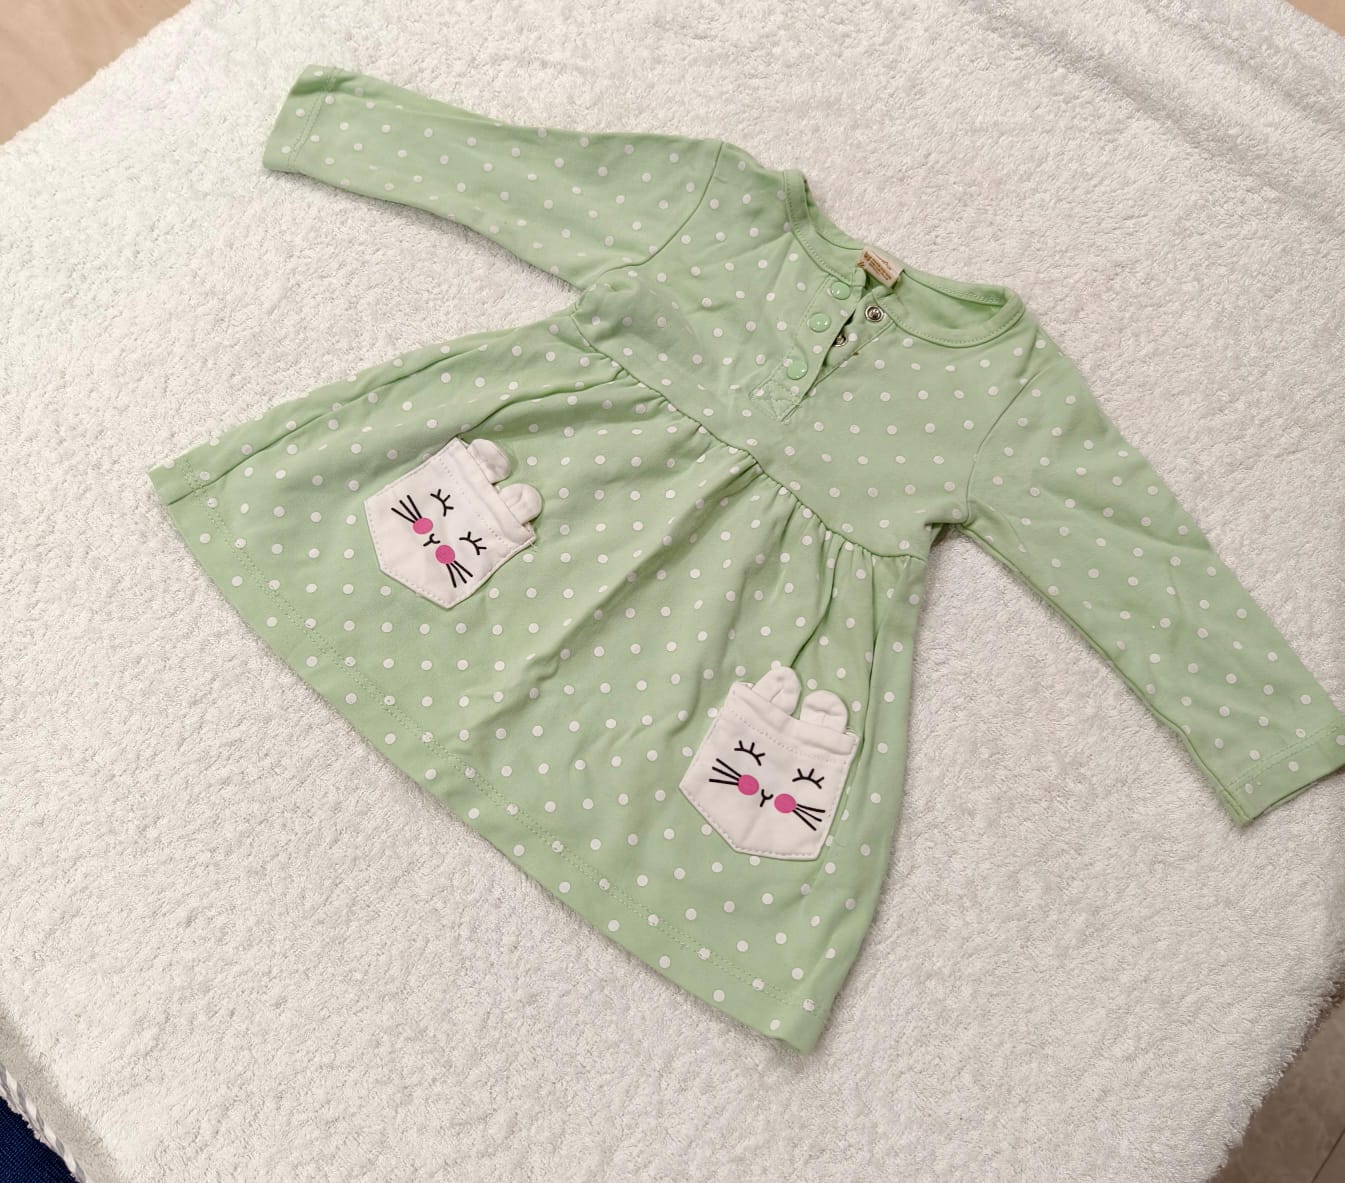 secondhand clothes for newborn baby